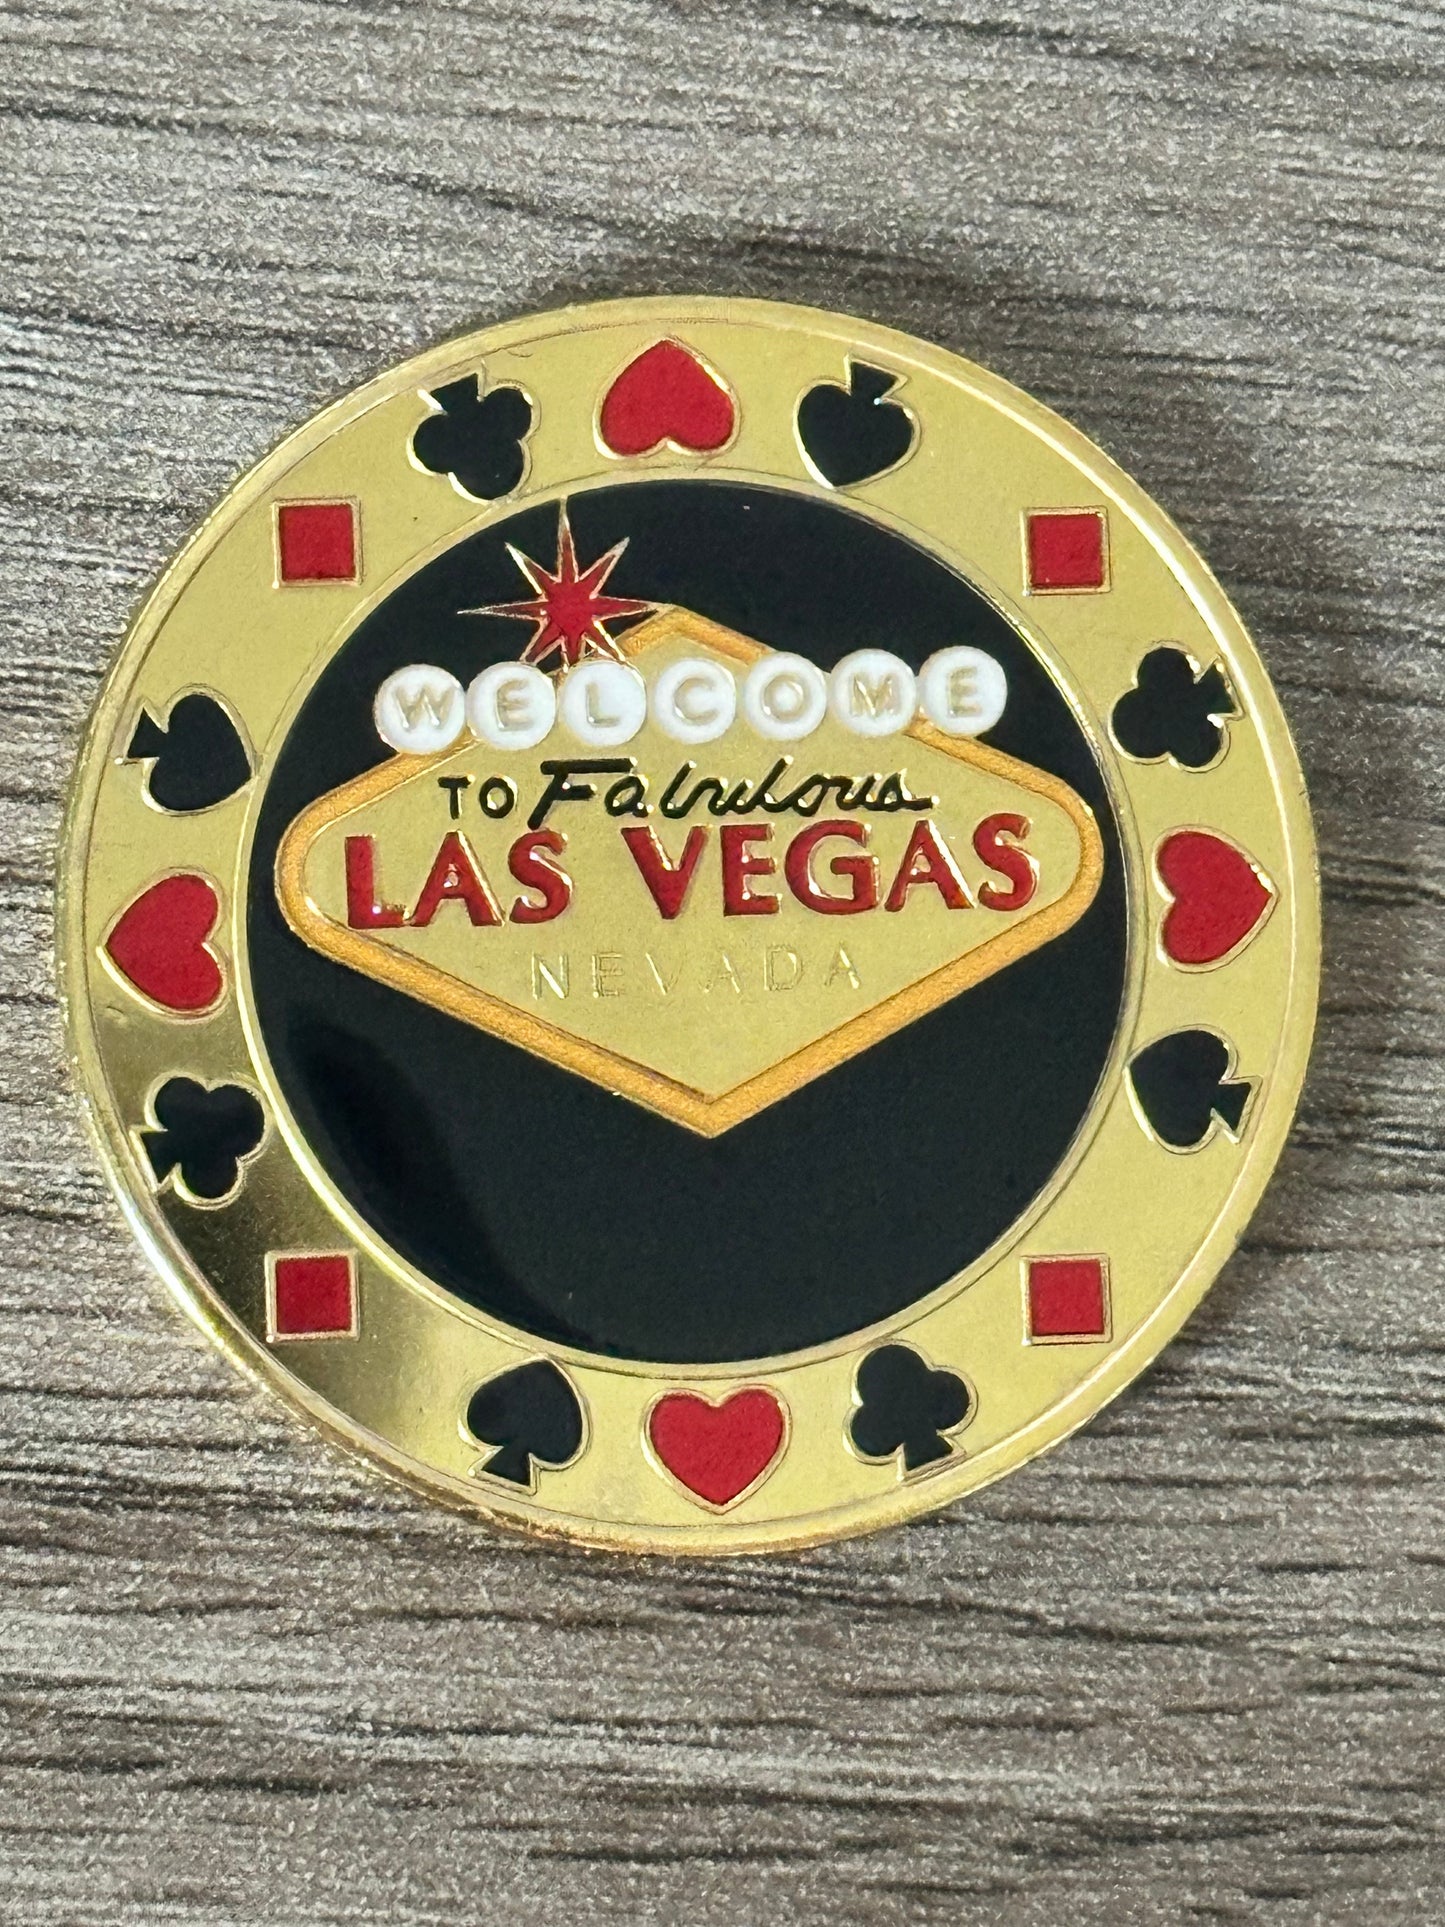 Las Vegas Poker Chip Challenge Collector Coin